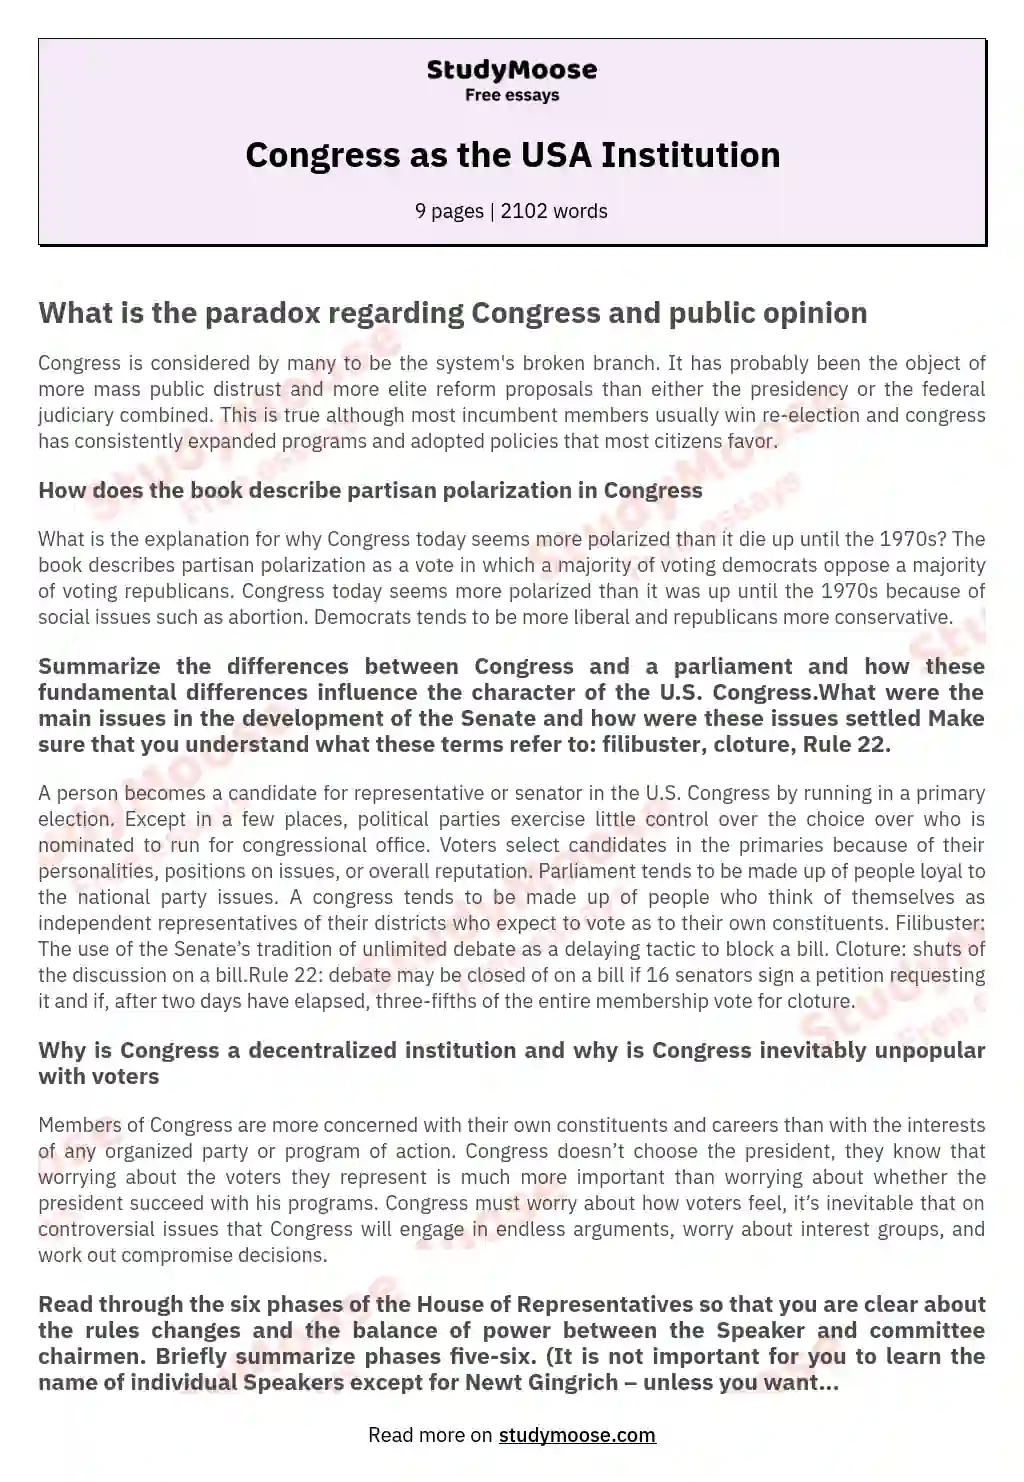 Congress as the USA Institution essay